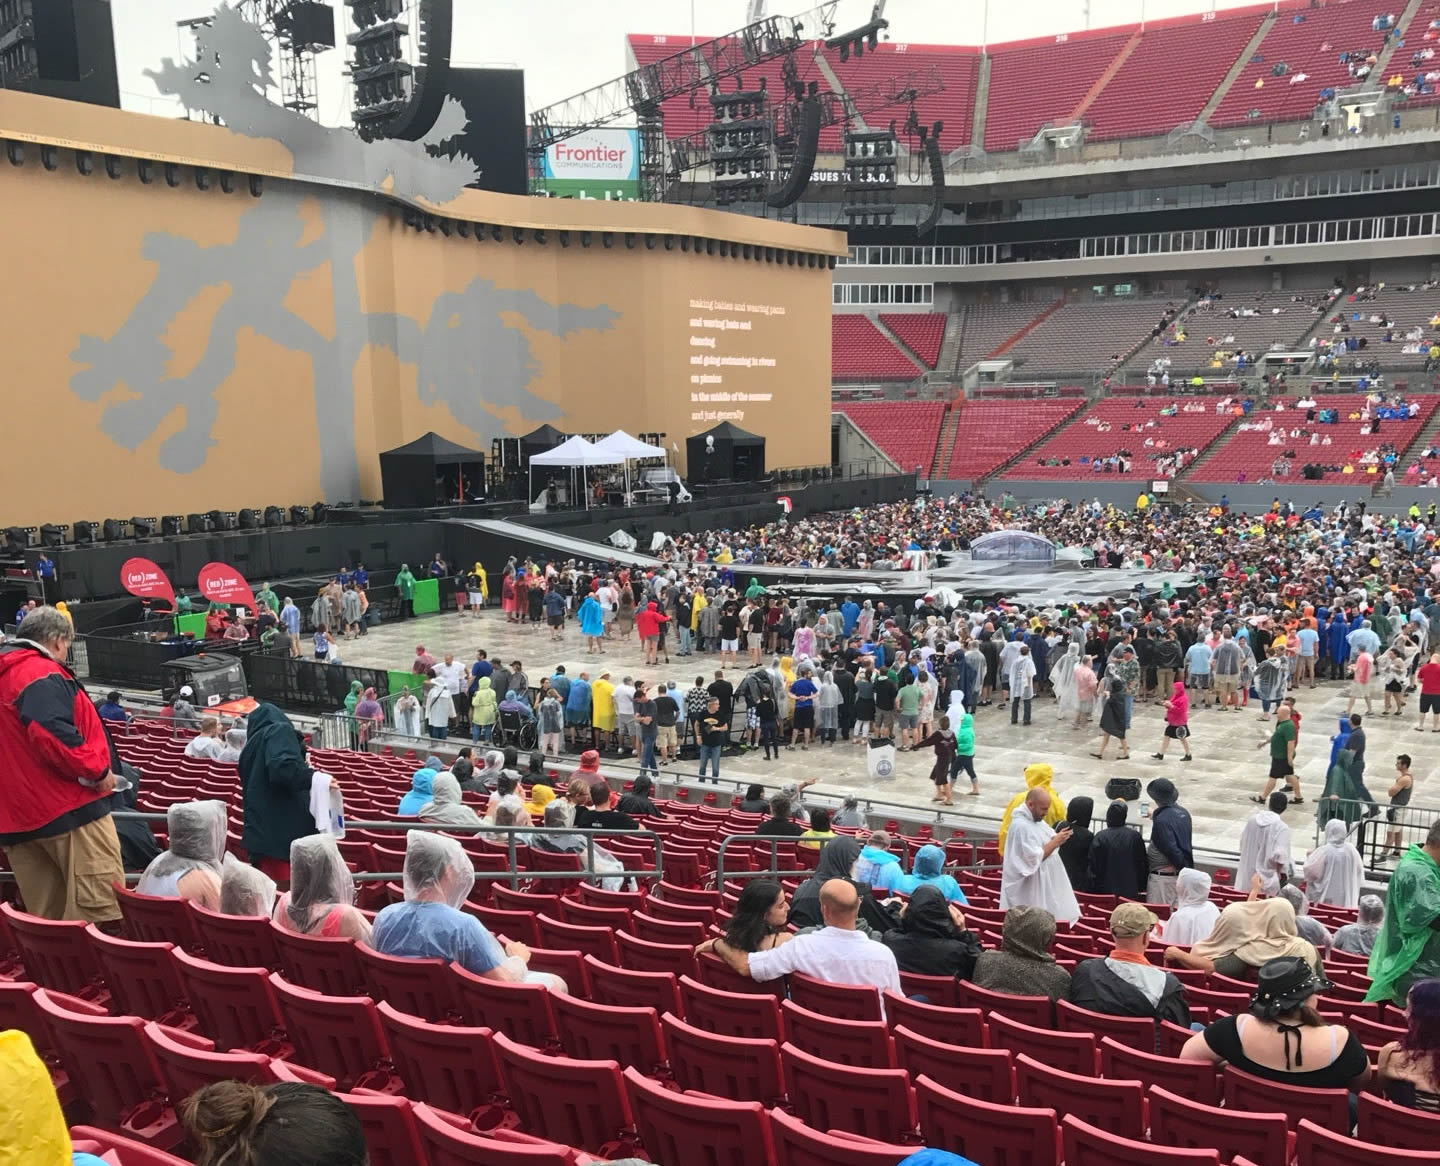 section 135, row s seat view  for concert - raymond james stadium